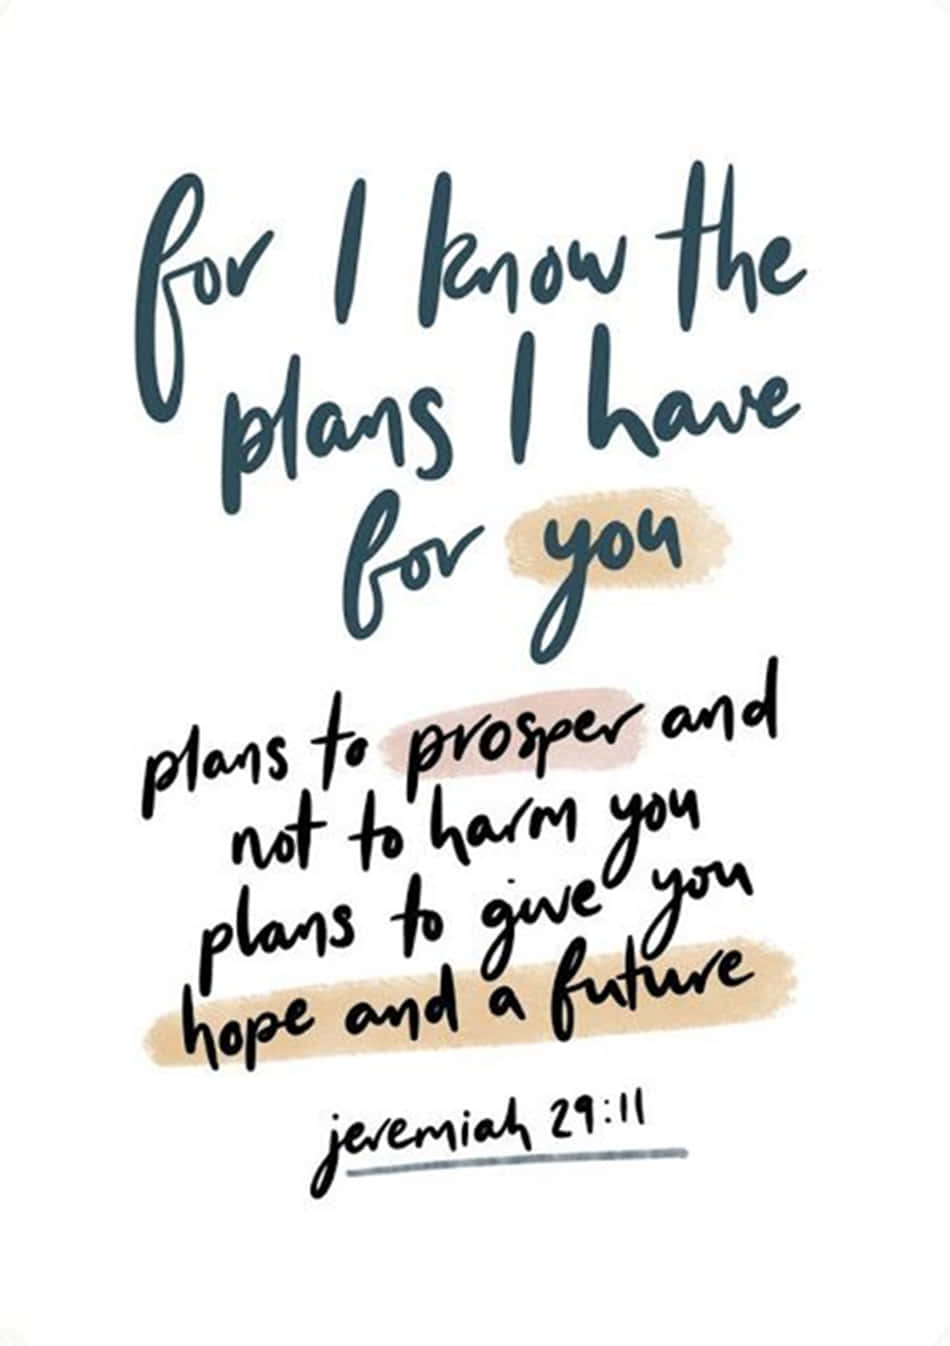 "For I know the plans I have for you - Jeremiah 29:11" Wallpaper